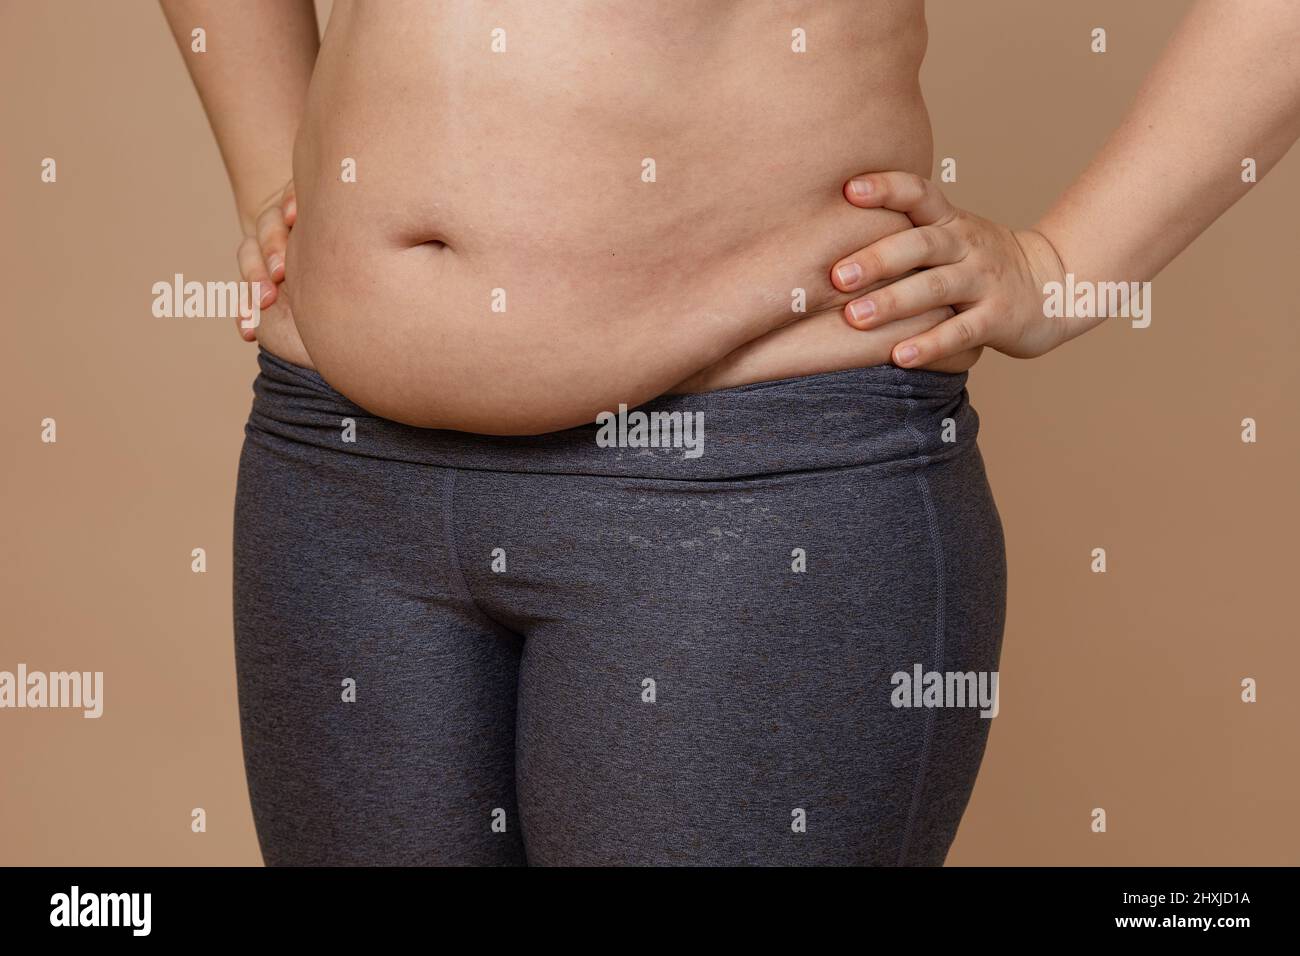 https://c8.alamy.com/comp/2HXJD1A/front-view-of-overweighted-thick-belly-of-woman-wearing-leggings-body-positive-violation-of-cell-elasticity-loss-of-nutrients-sagging-skin-after-2HXJD1A.jpg